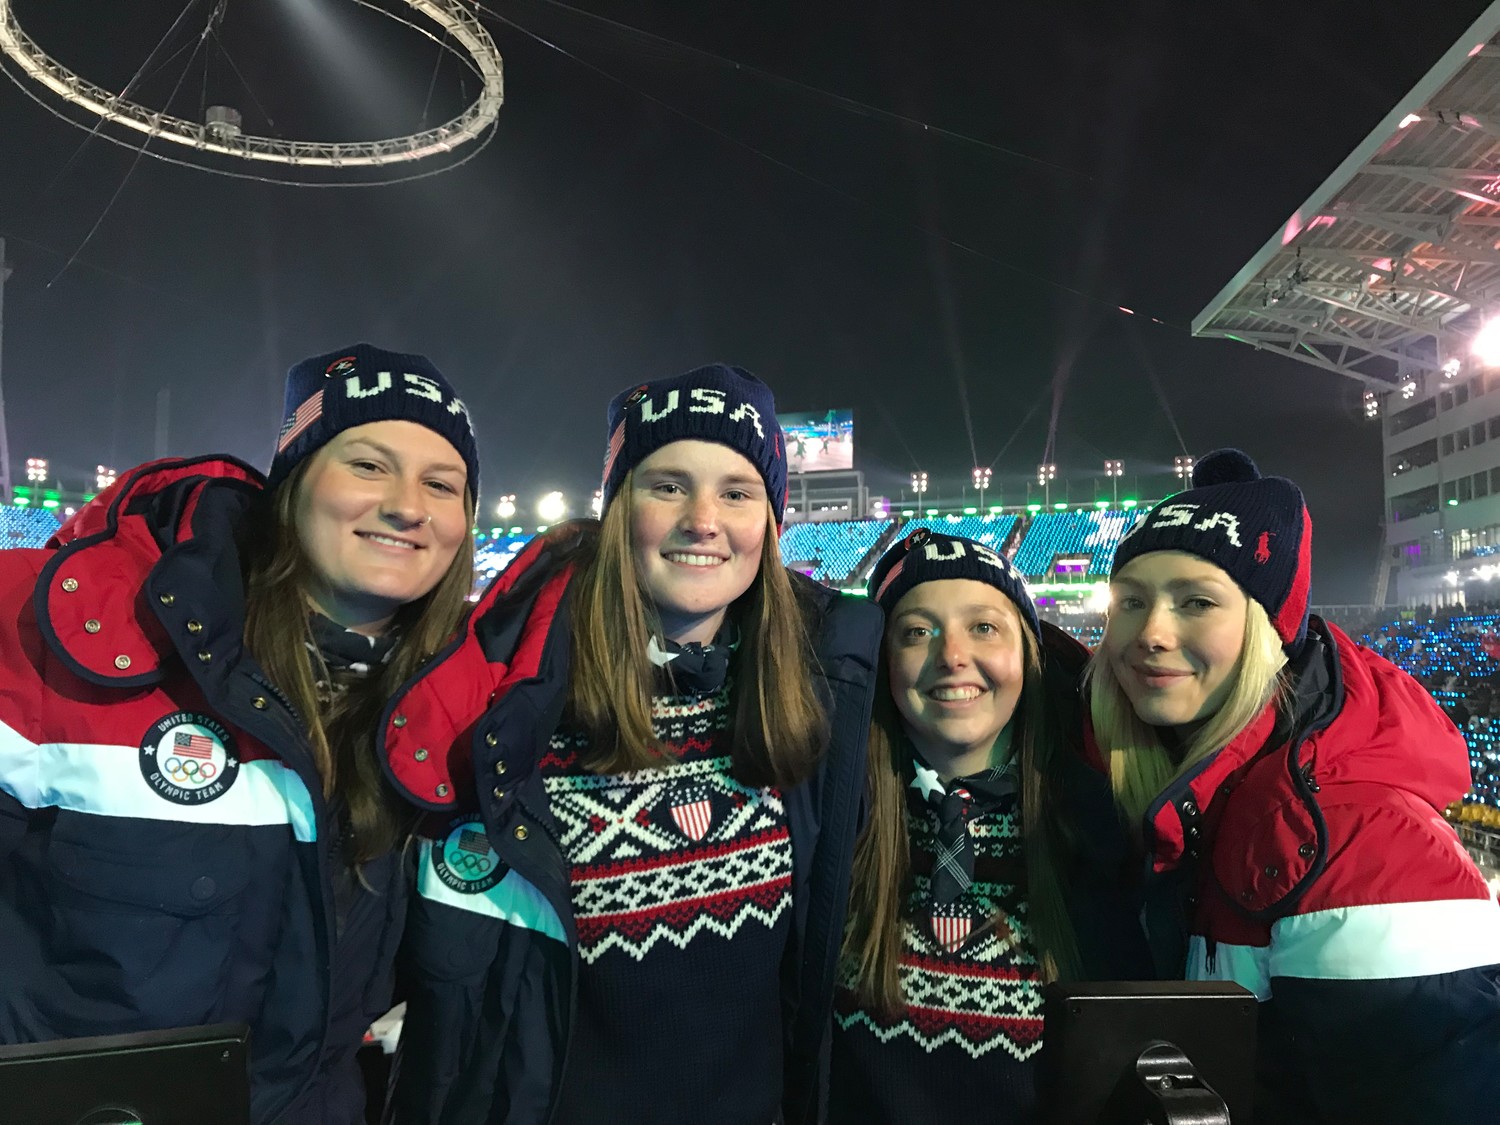 Devin Logan, left, with Caroline Clair, Darian Stevens and Maggie Voisin of the 2018 U.S. Women’s slopestyle team at the Winter Olympics opening ceremony last week.  Logan won the inaugural silver medal in the sport  at the 2014 Olympics in Sochi, Russia.